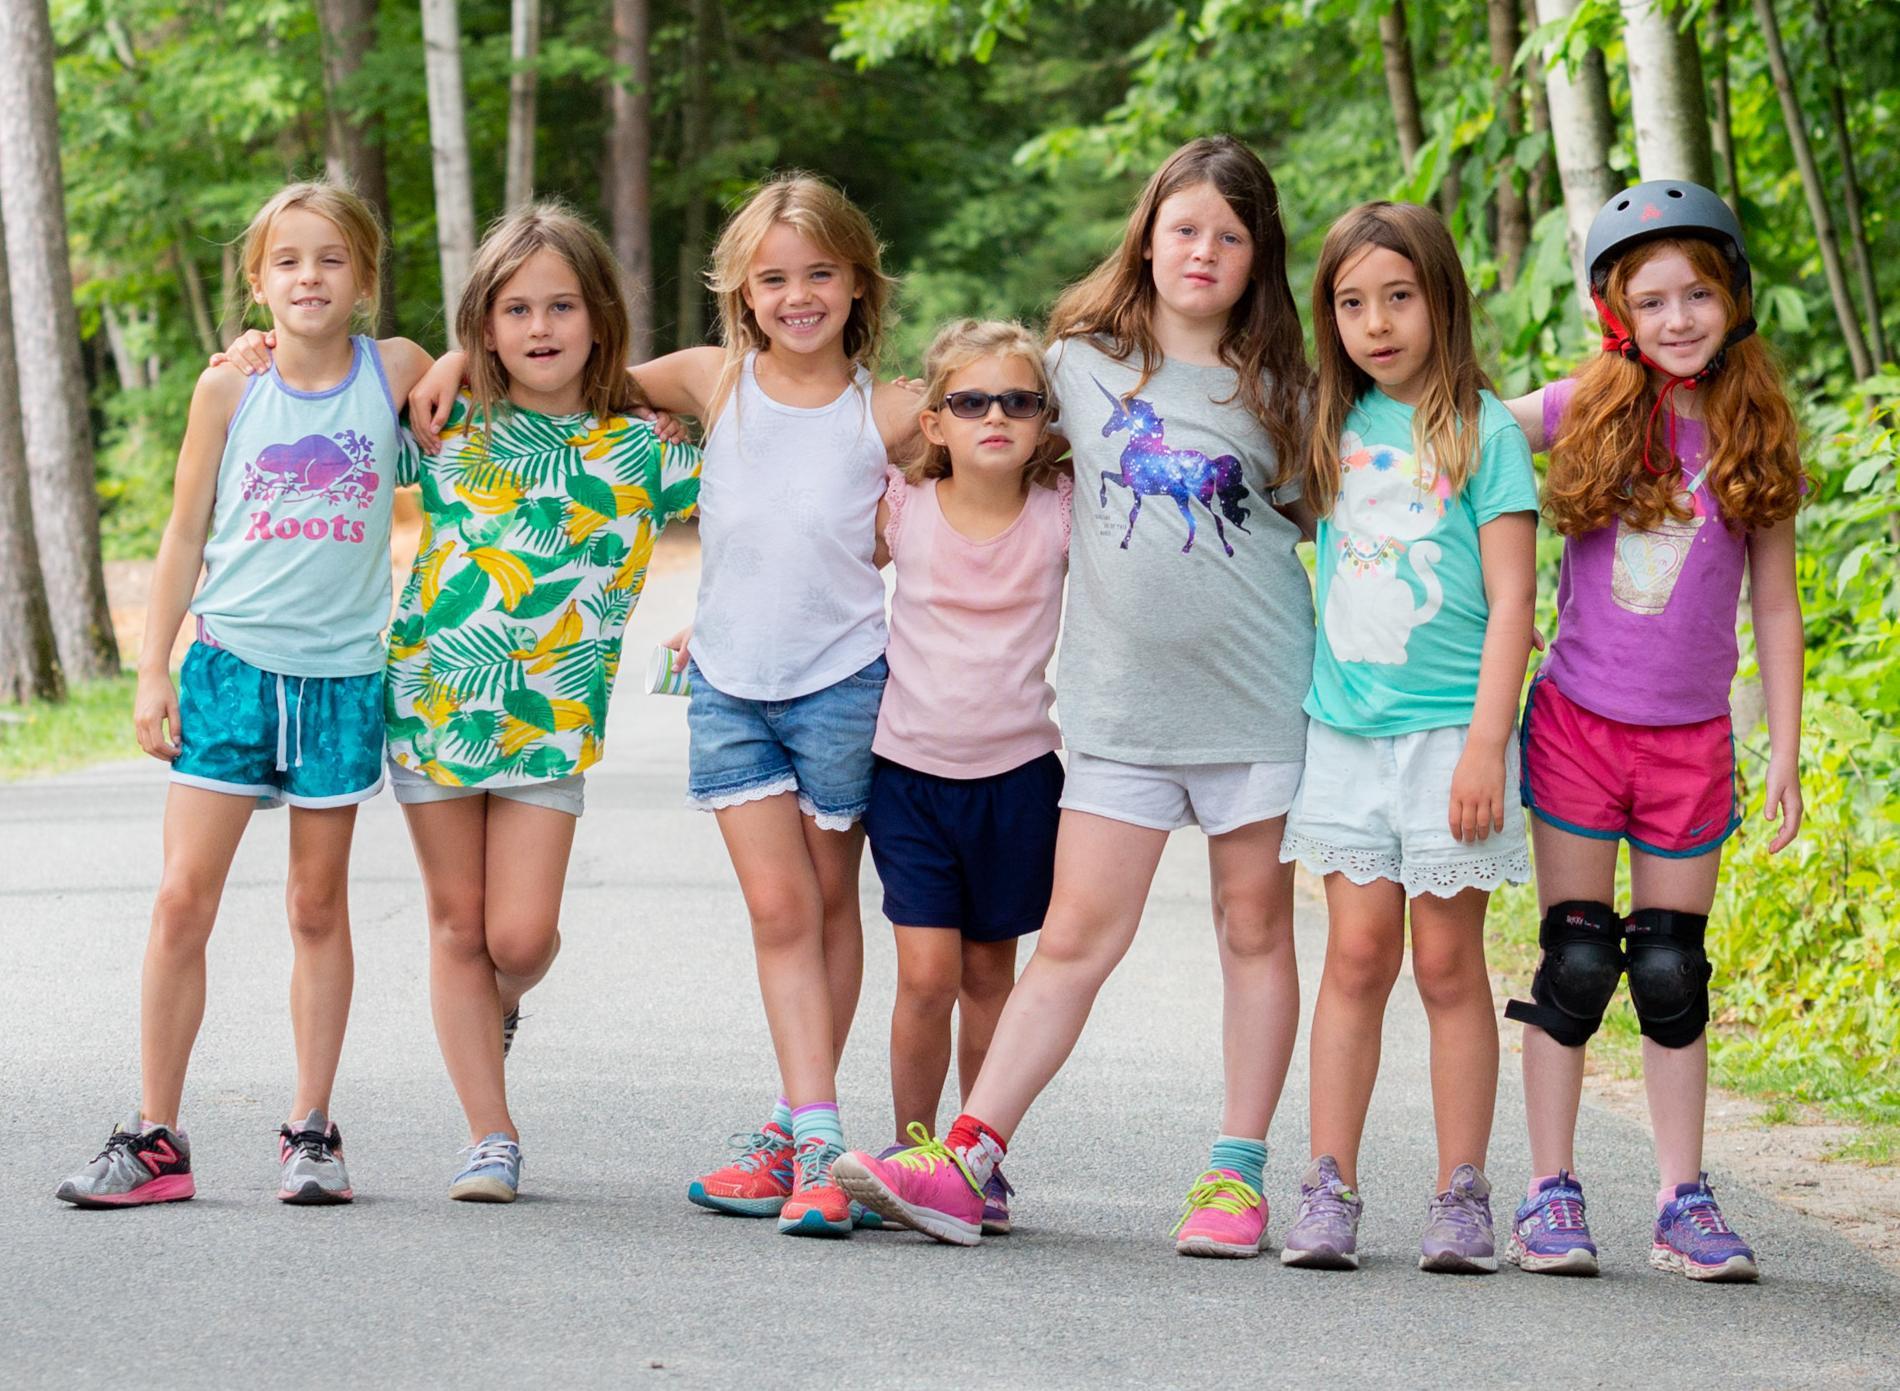 Tips to Prepare Your First-time Camper for Summer Camp